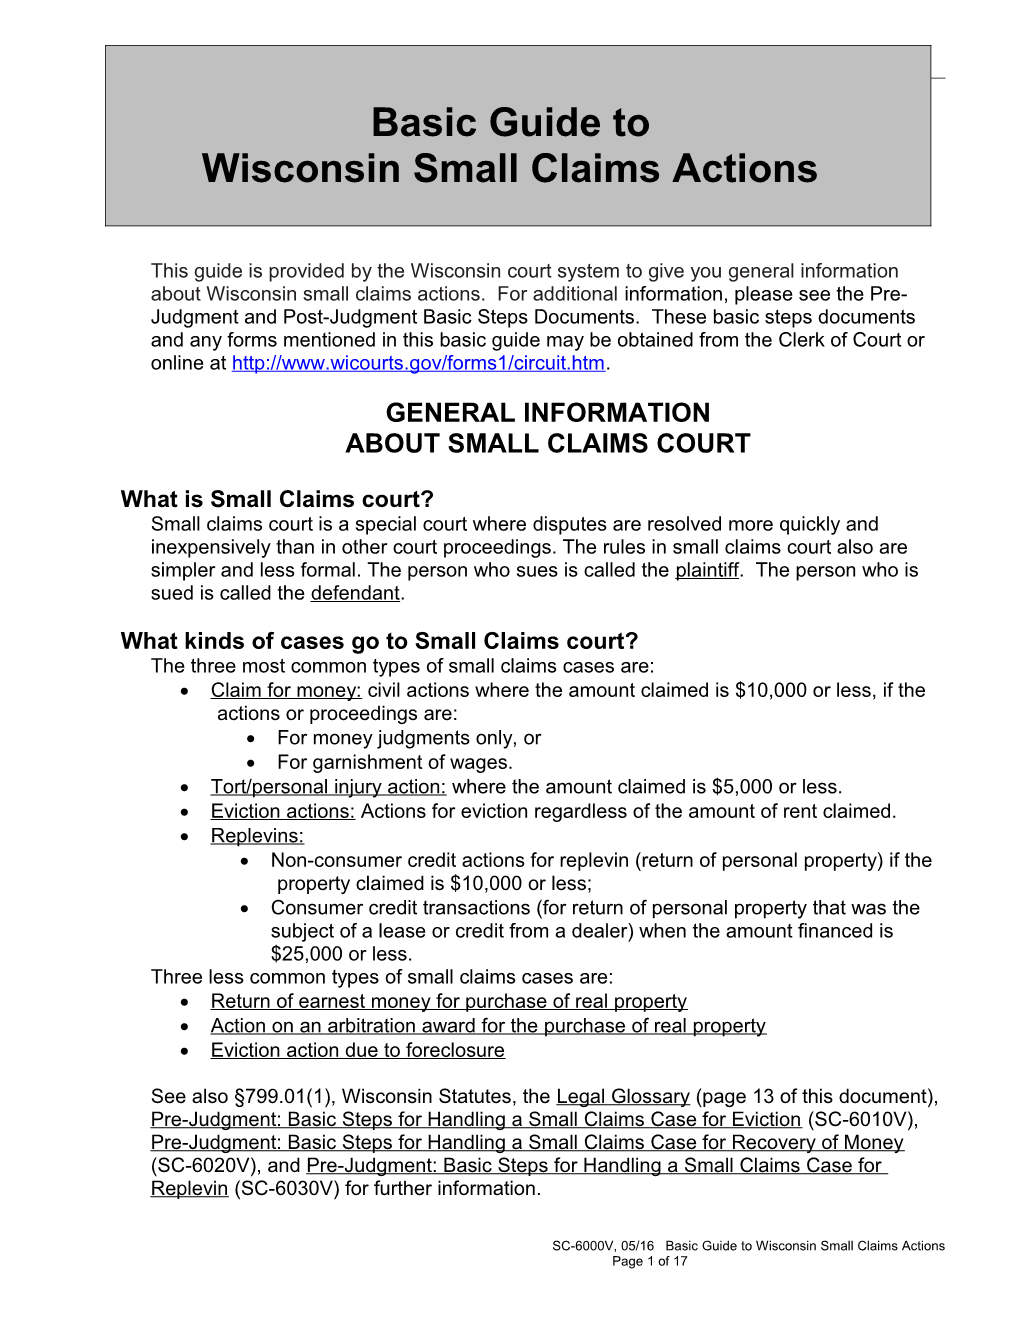 SC-6000: Basic Guide to Wisconsin Small Claims Actions